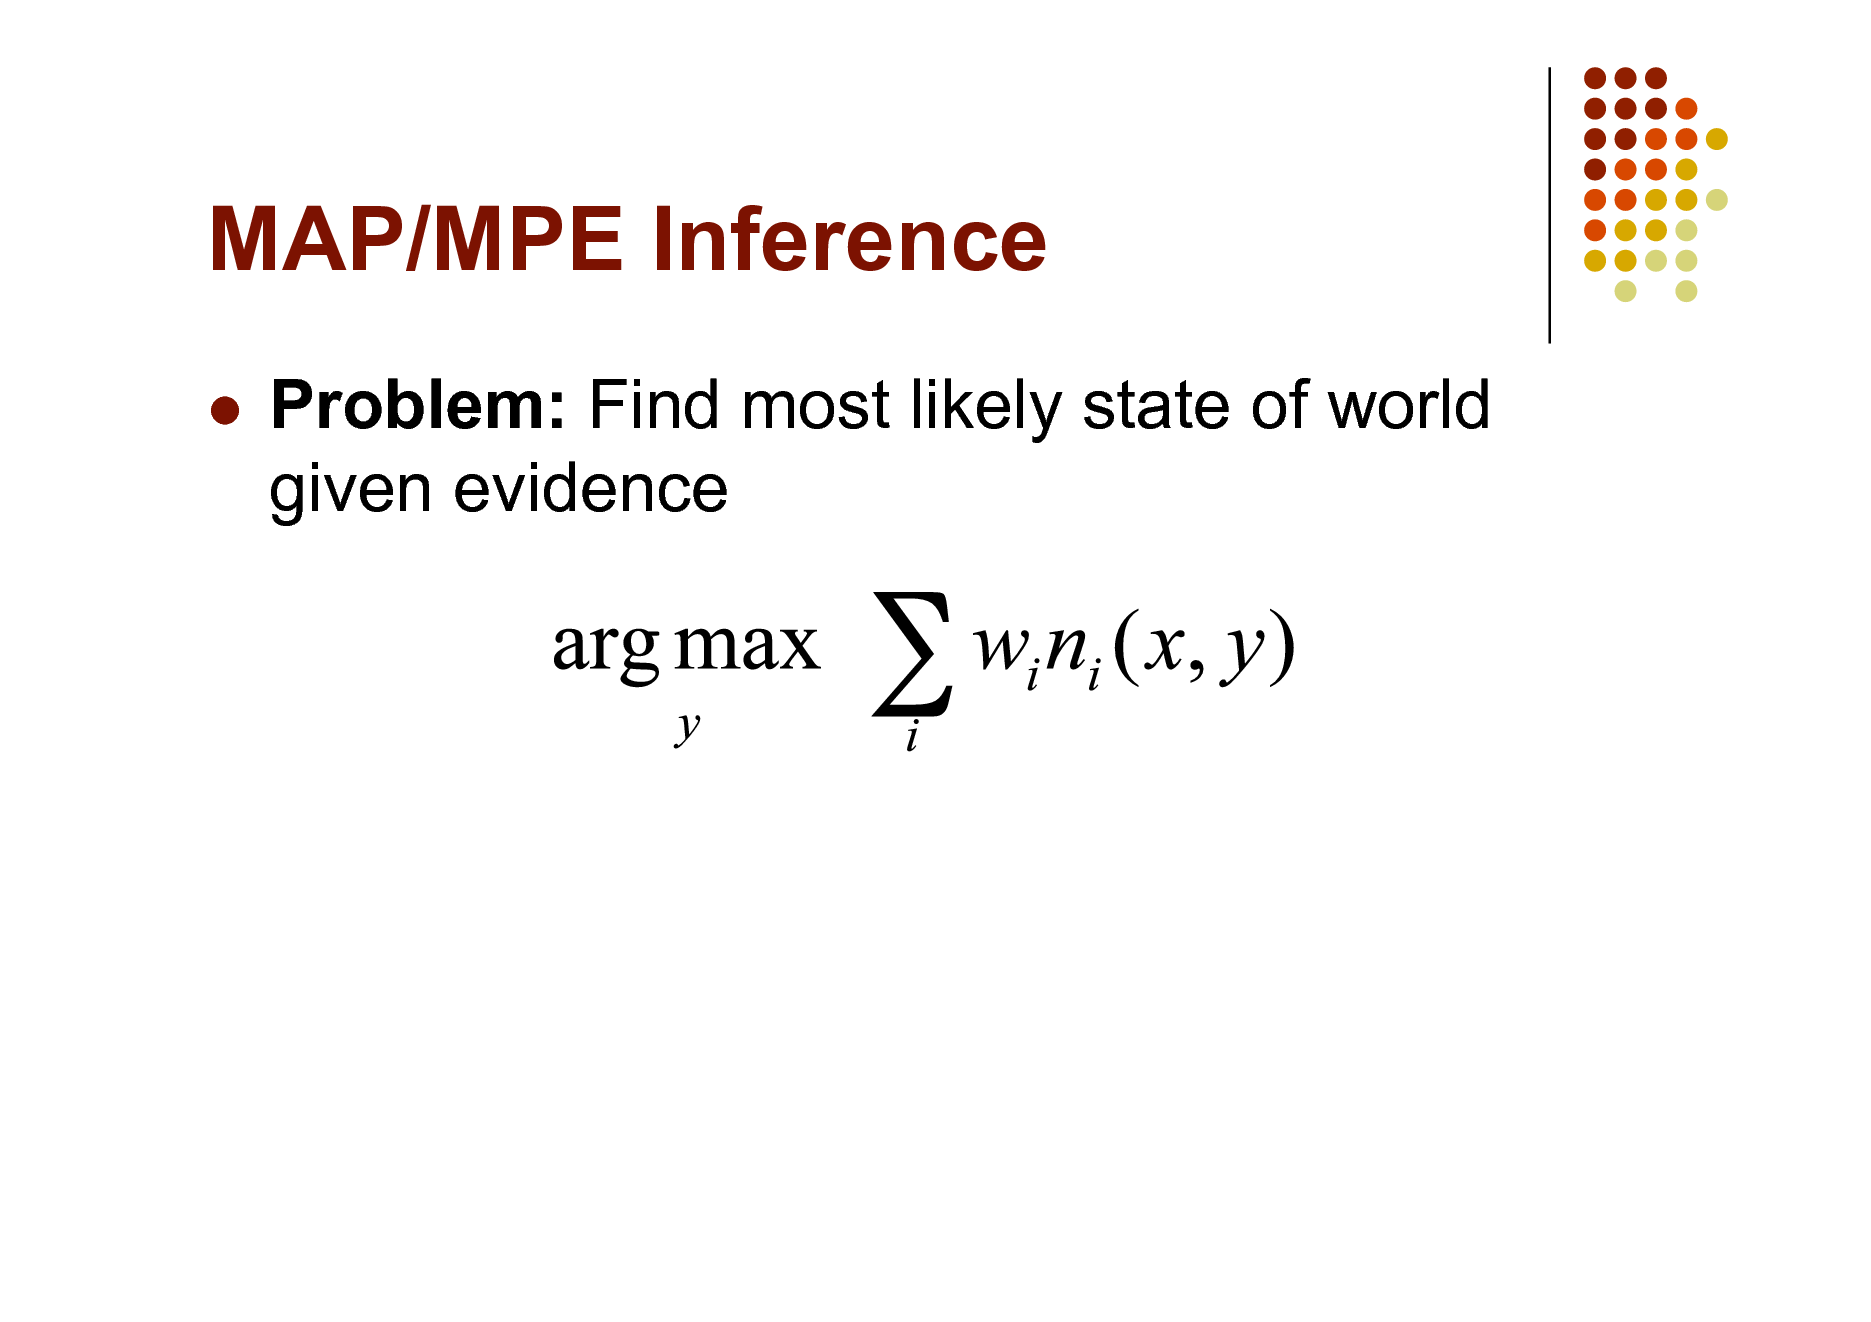 Slide: MAP/MPE Inference


Problem: Find most likely state of world given evidence

